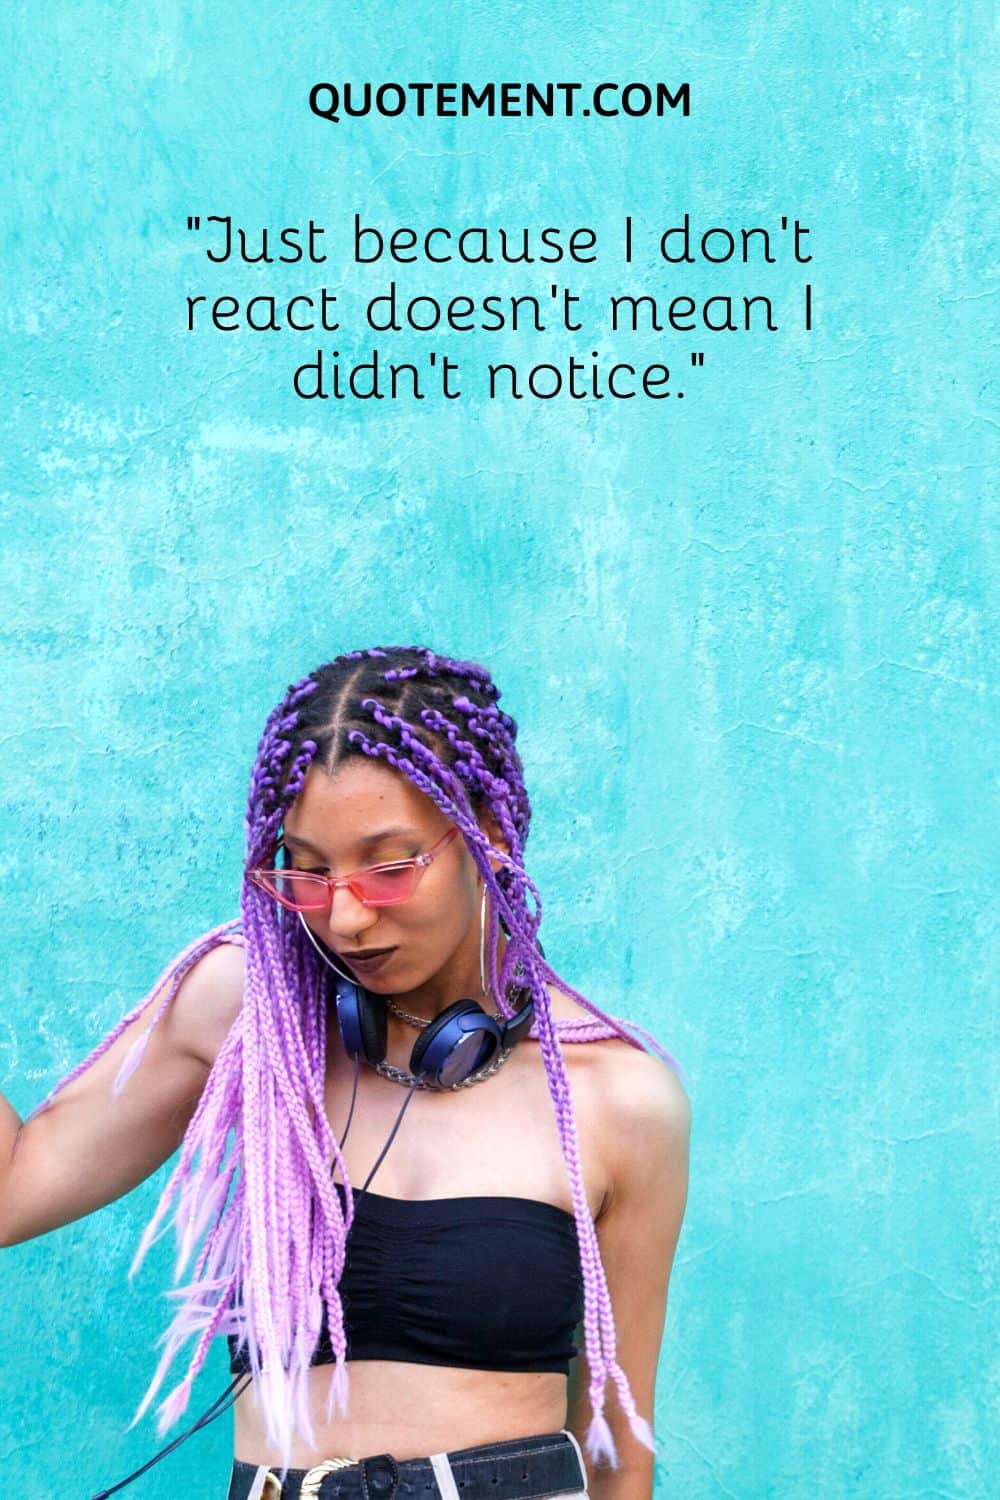 Just because I don’t react doesn’t mean I didn’t notice